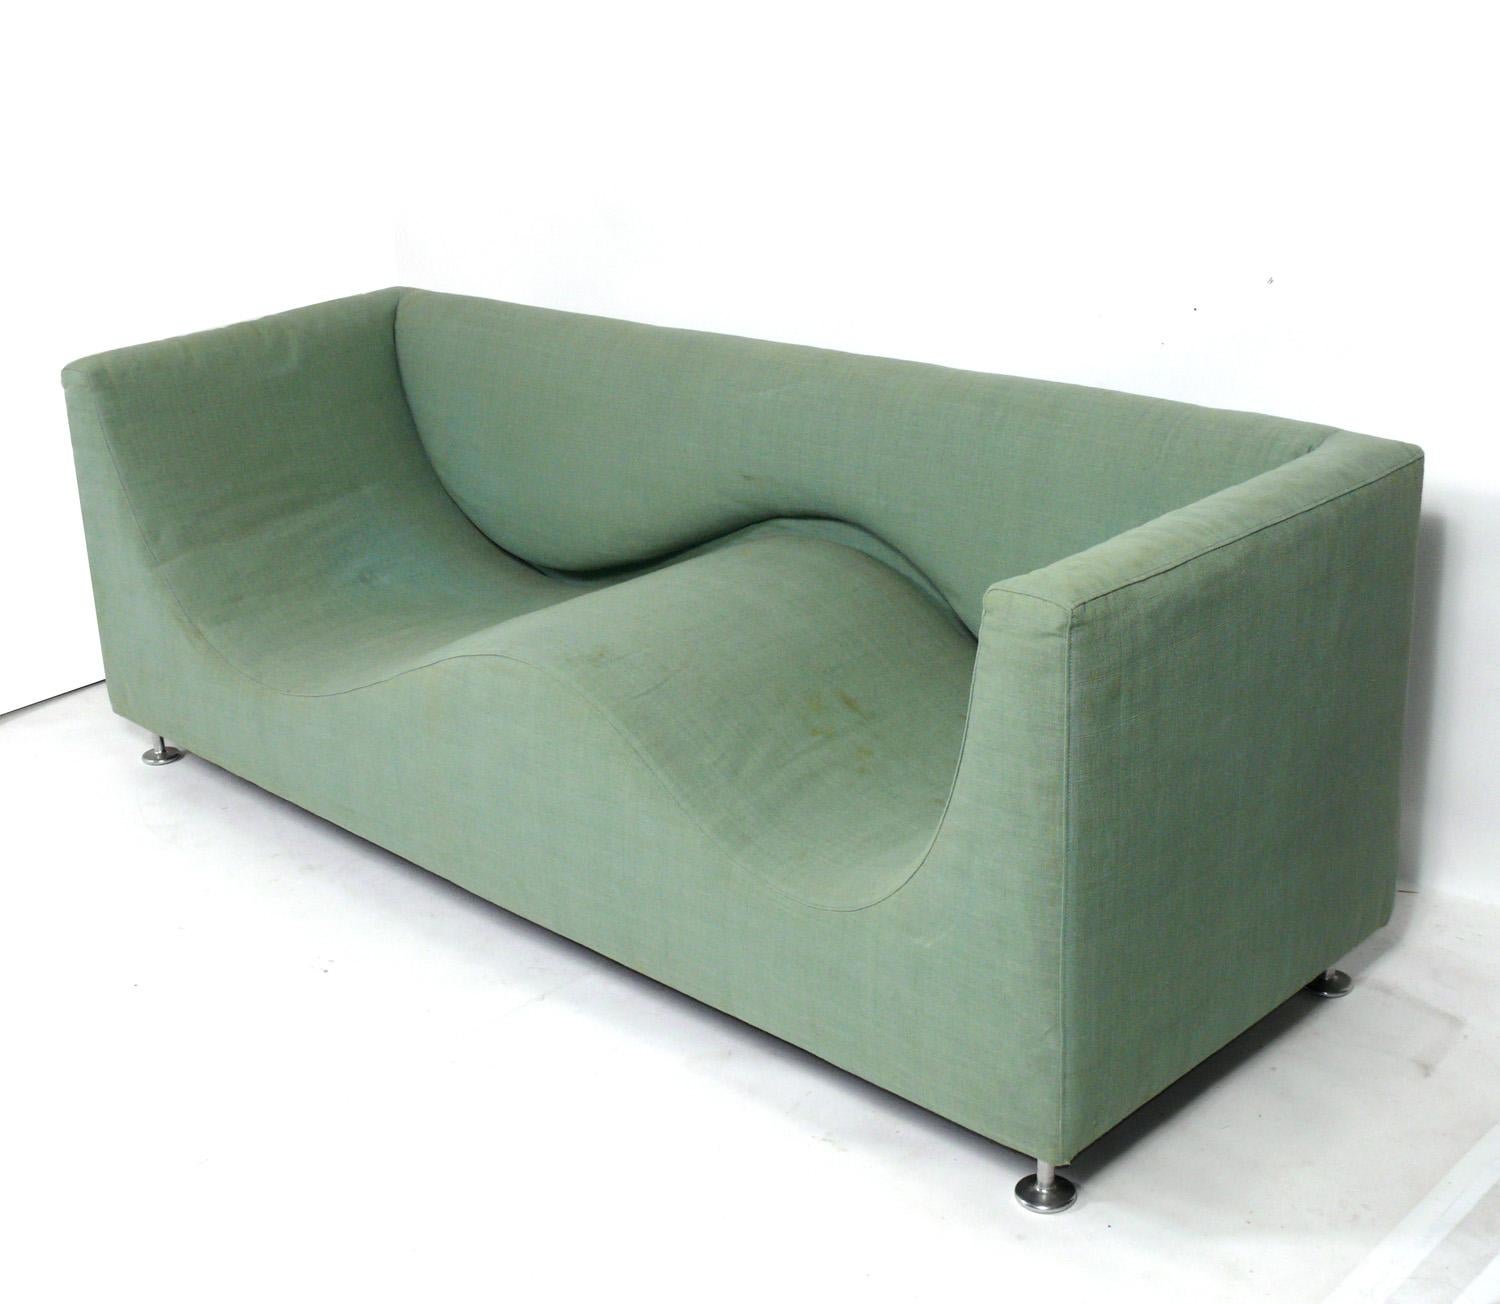 Sculptural post modern sofa, designed by Jasper Morrison for Cappellini, Italy, circa 1990s. This sofa retains it's original upholstery which has some spots and wear. It should be reupholstered unless you really like the vintage look. If you choose